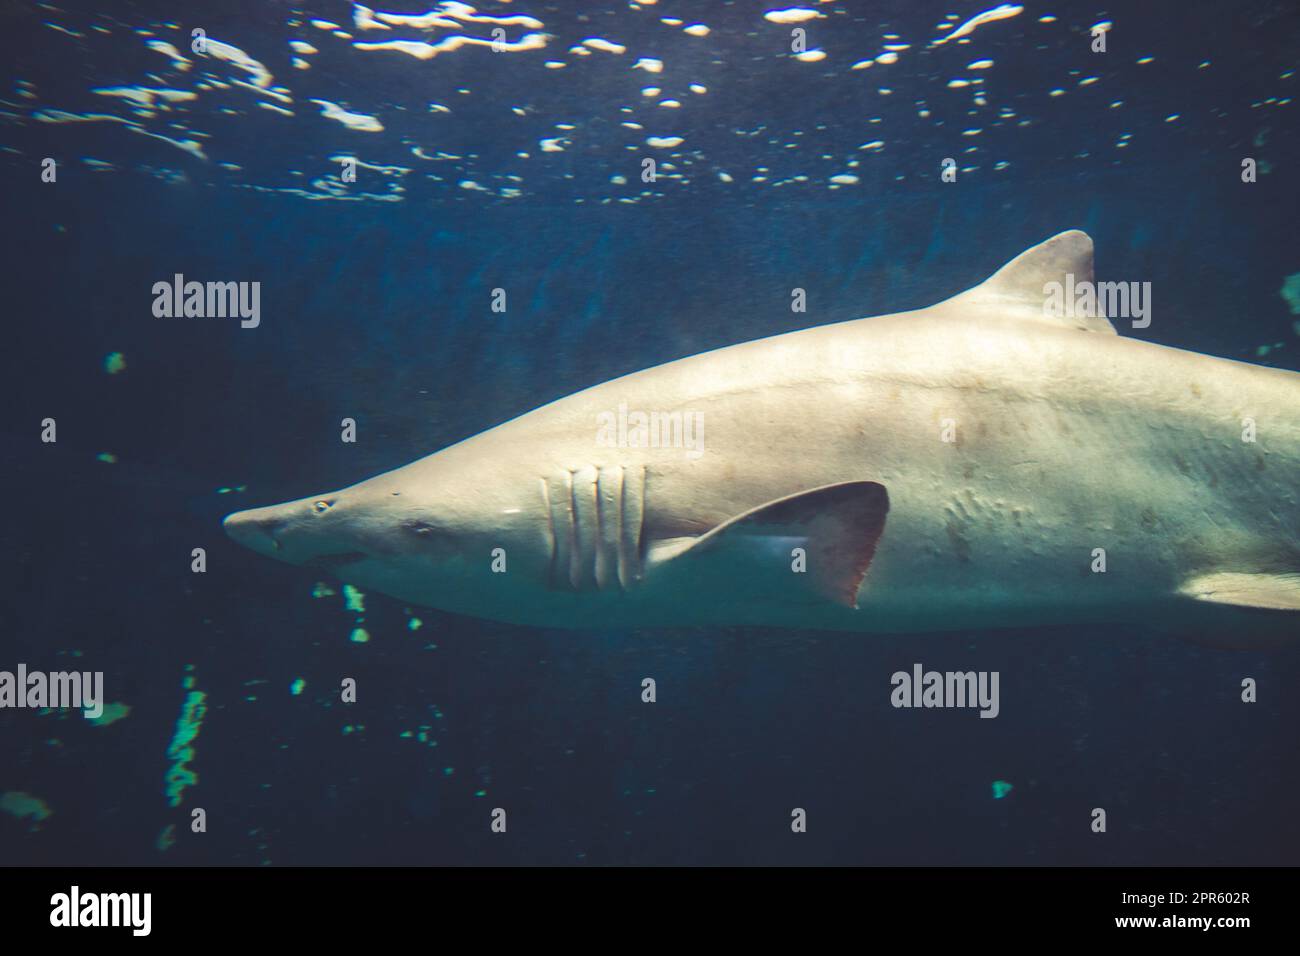 Sand tiger shark close-up view in ocean Stock Photo